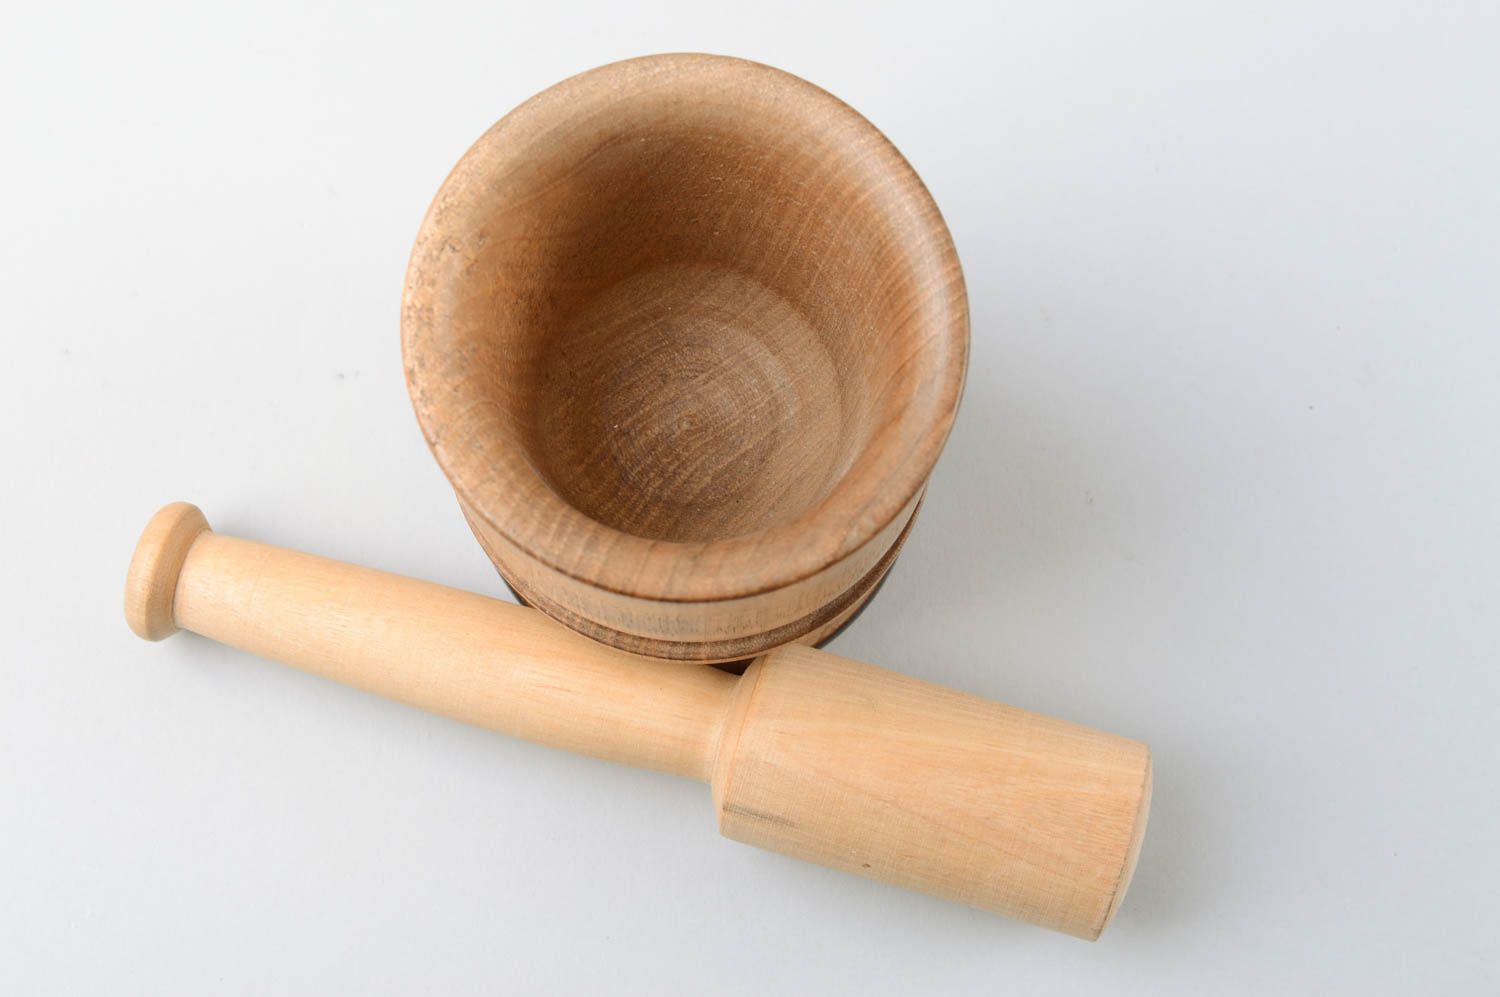 Handmade organic mortar and pestle wooden hand spice grinder wooden mortar photo 5